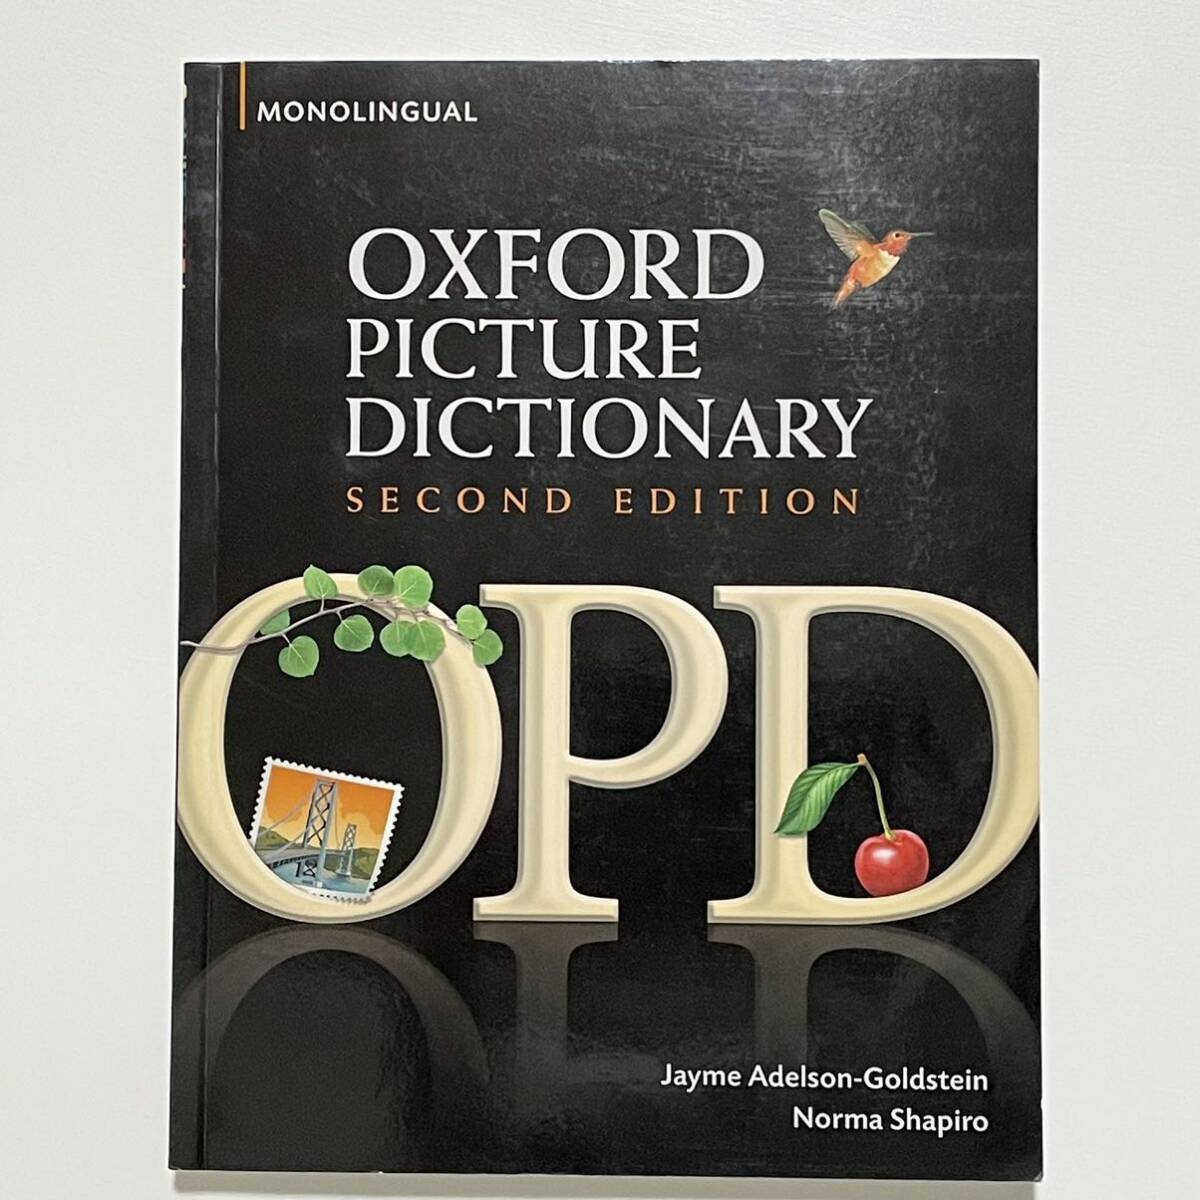 Oxford Picture Dictionary Second Edition Monolingual (オックスフォード ピクチャー ディクショナリー 第2版/OPD)の画像1